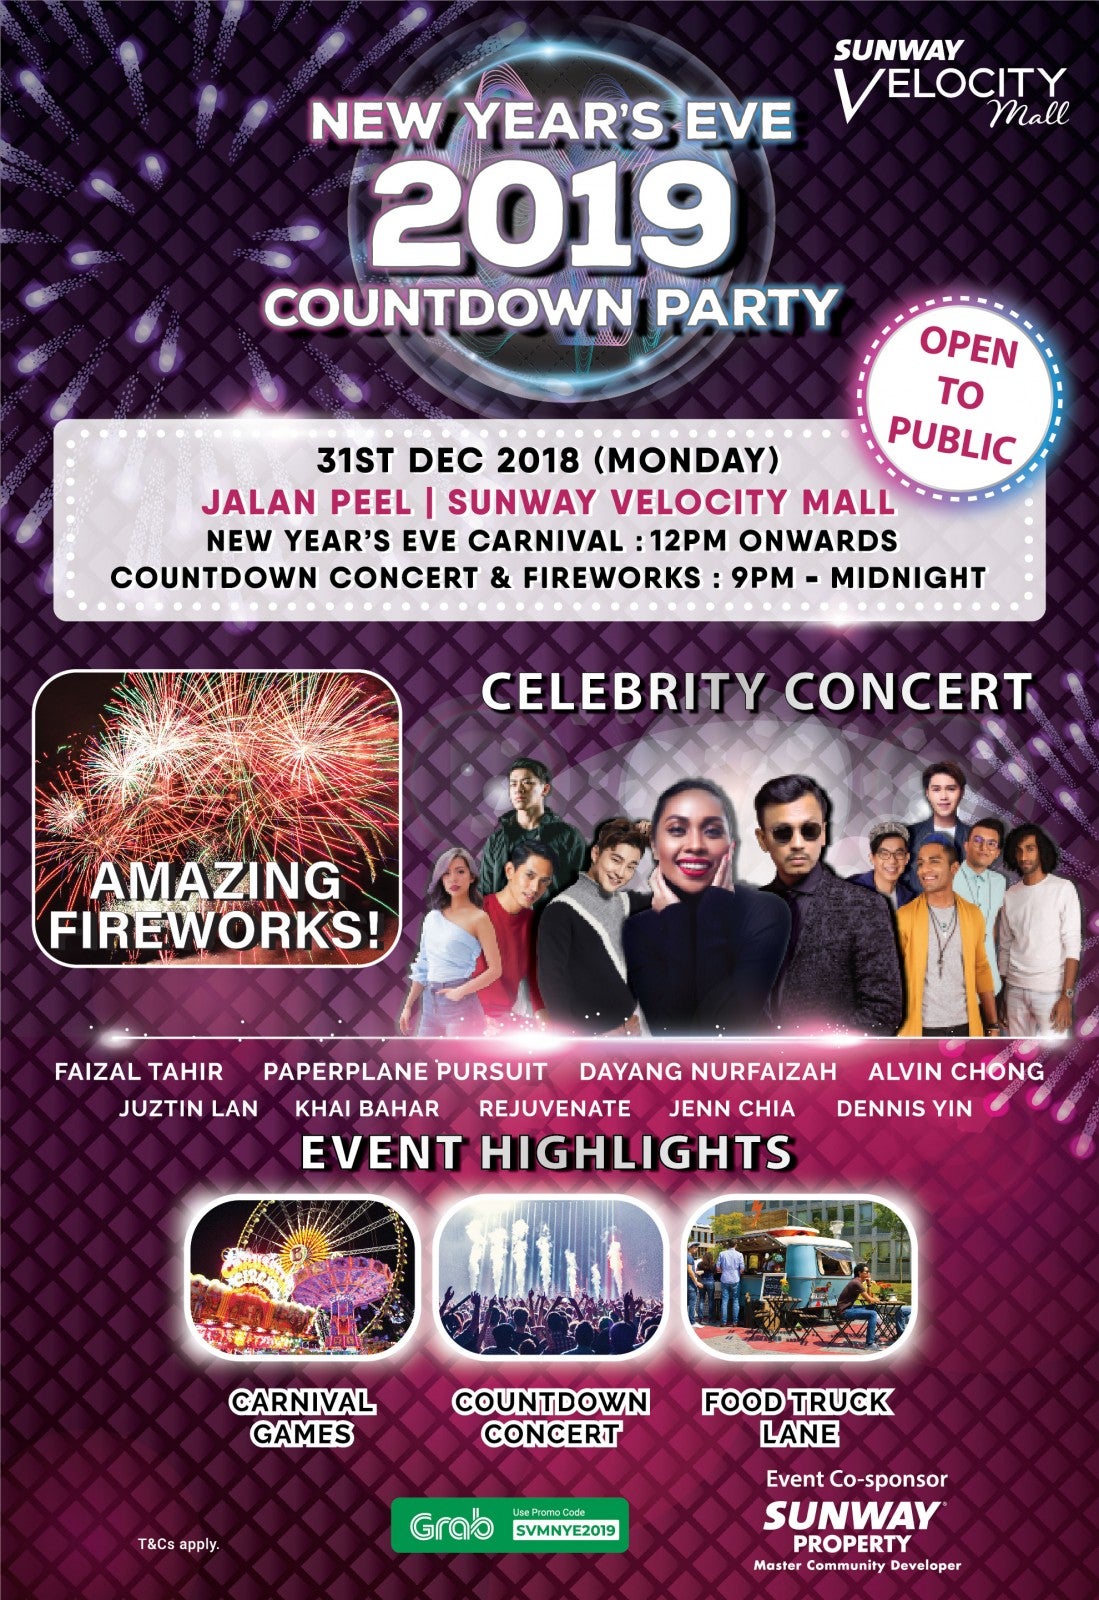 [TEST] 8 Reasons This KL Mall is Going to Have the Most Lit NYE Countdown This Year - WORLD OF BUZZ 3